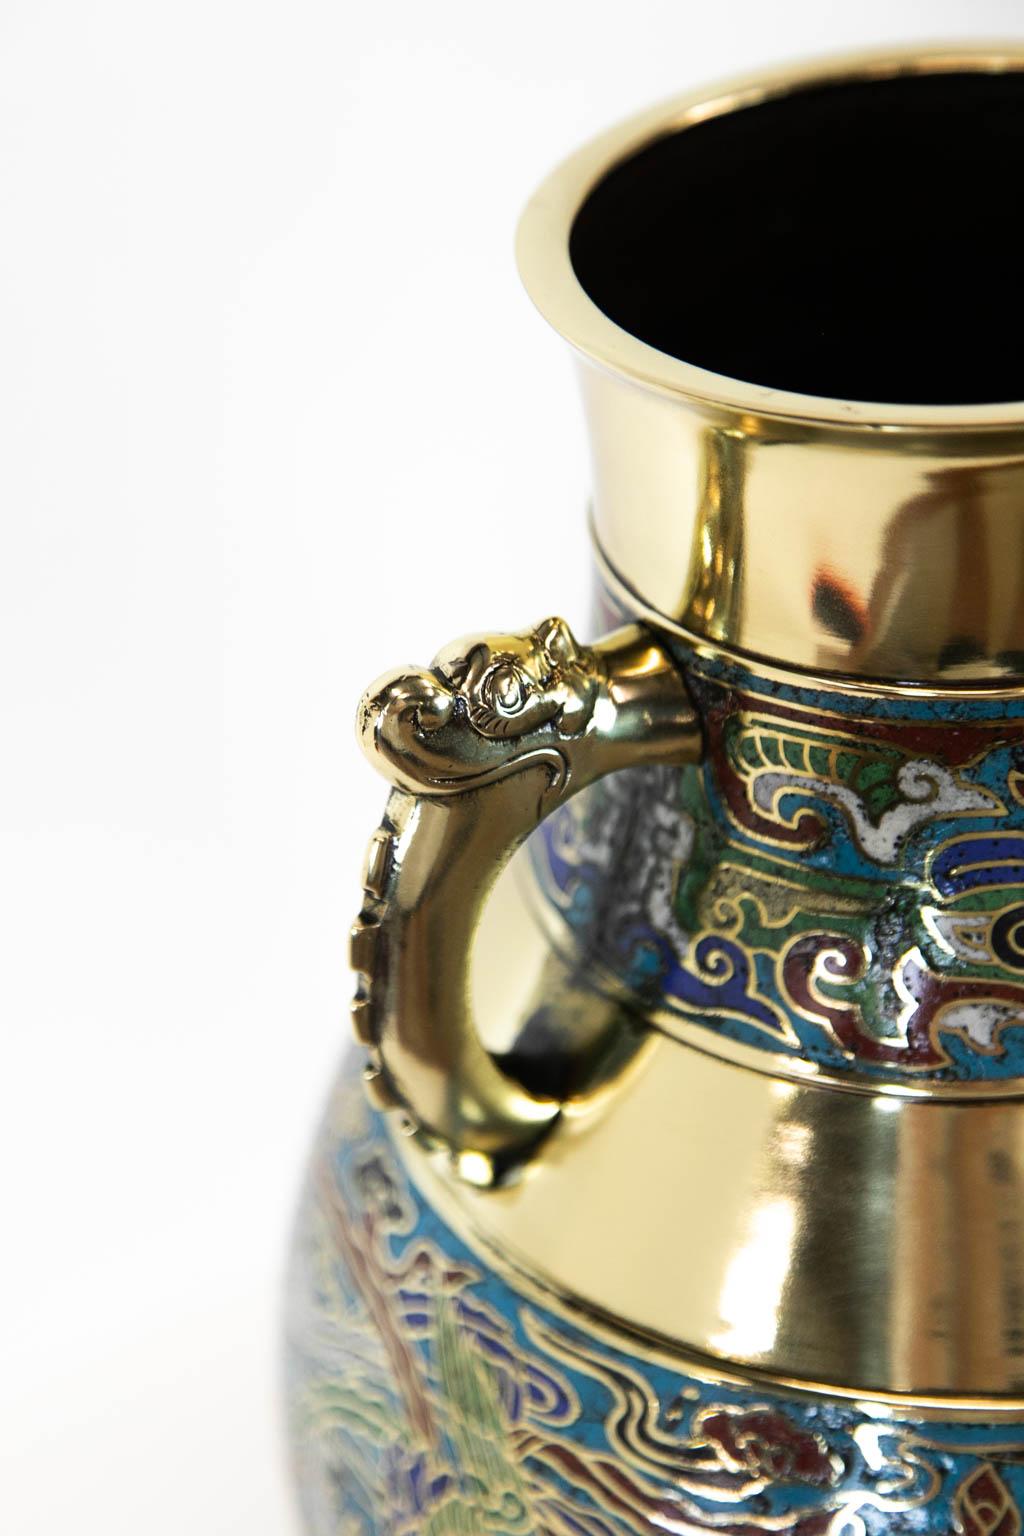 This Japanese brass vase has stylized dragon handles and polychrome cloisons depicting birds, clouds, and leaves. It is polished and lacquered for ease of maintenance.